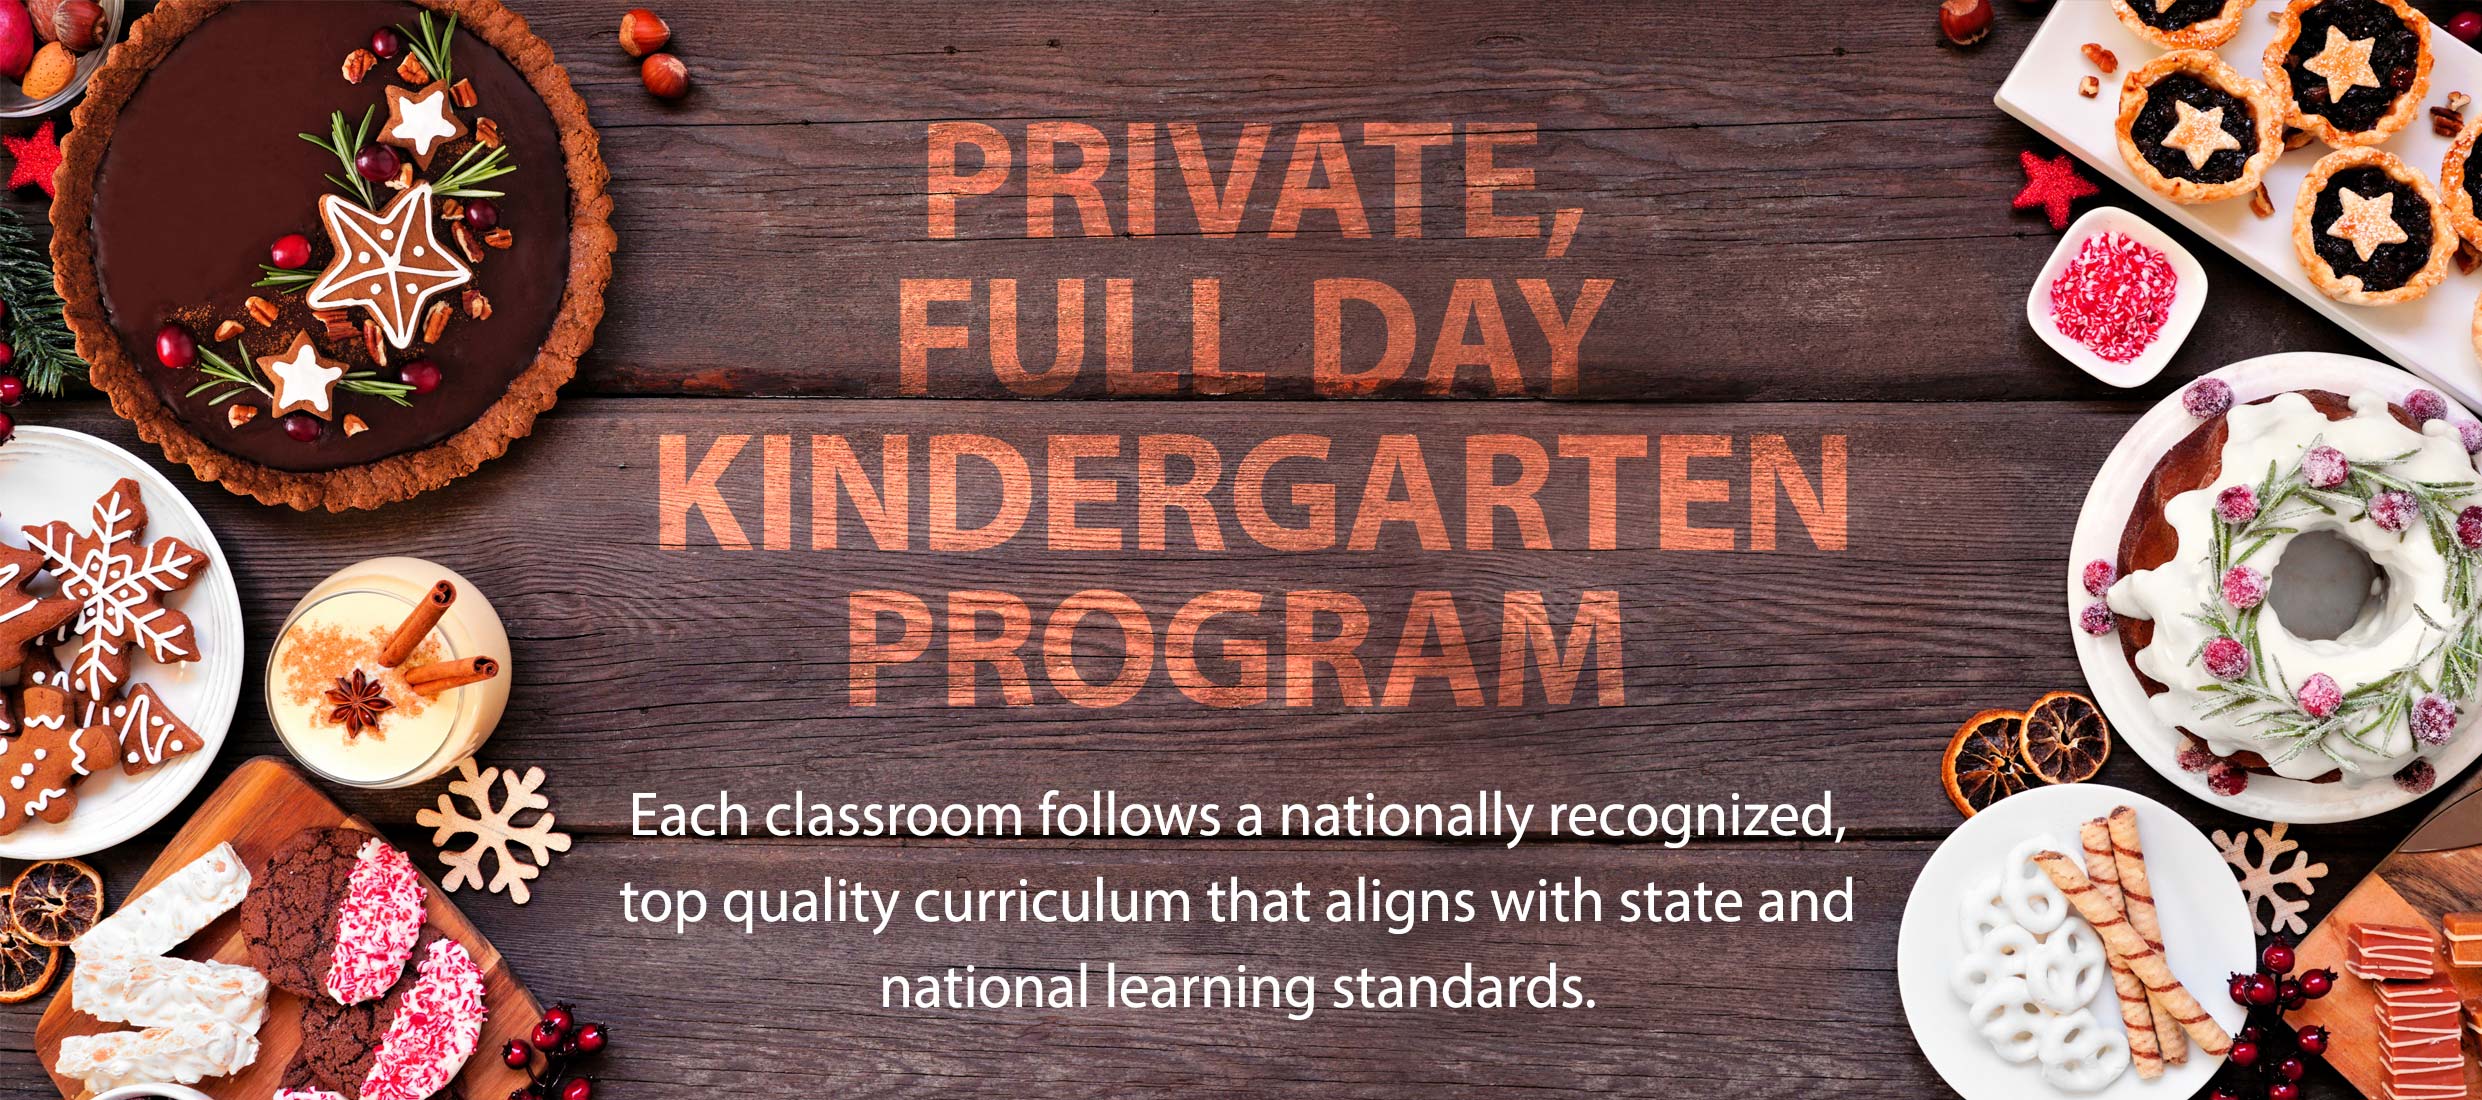 PRIVATE, FULL DAY KINDERGARTENG PROGRAM : Each classroom follows a nationally recognized, top quality curriculum that aligns with state and national learning standards.